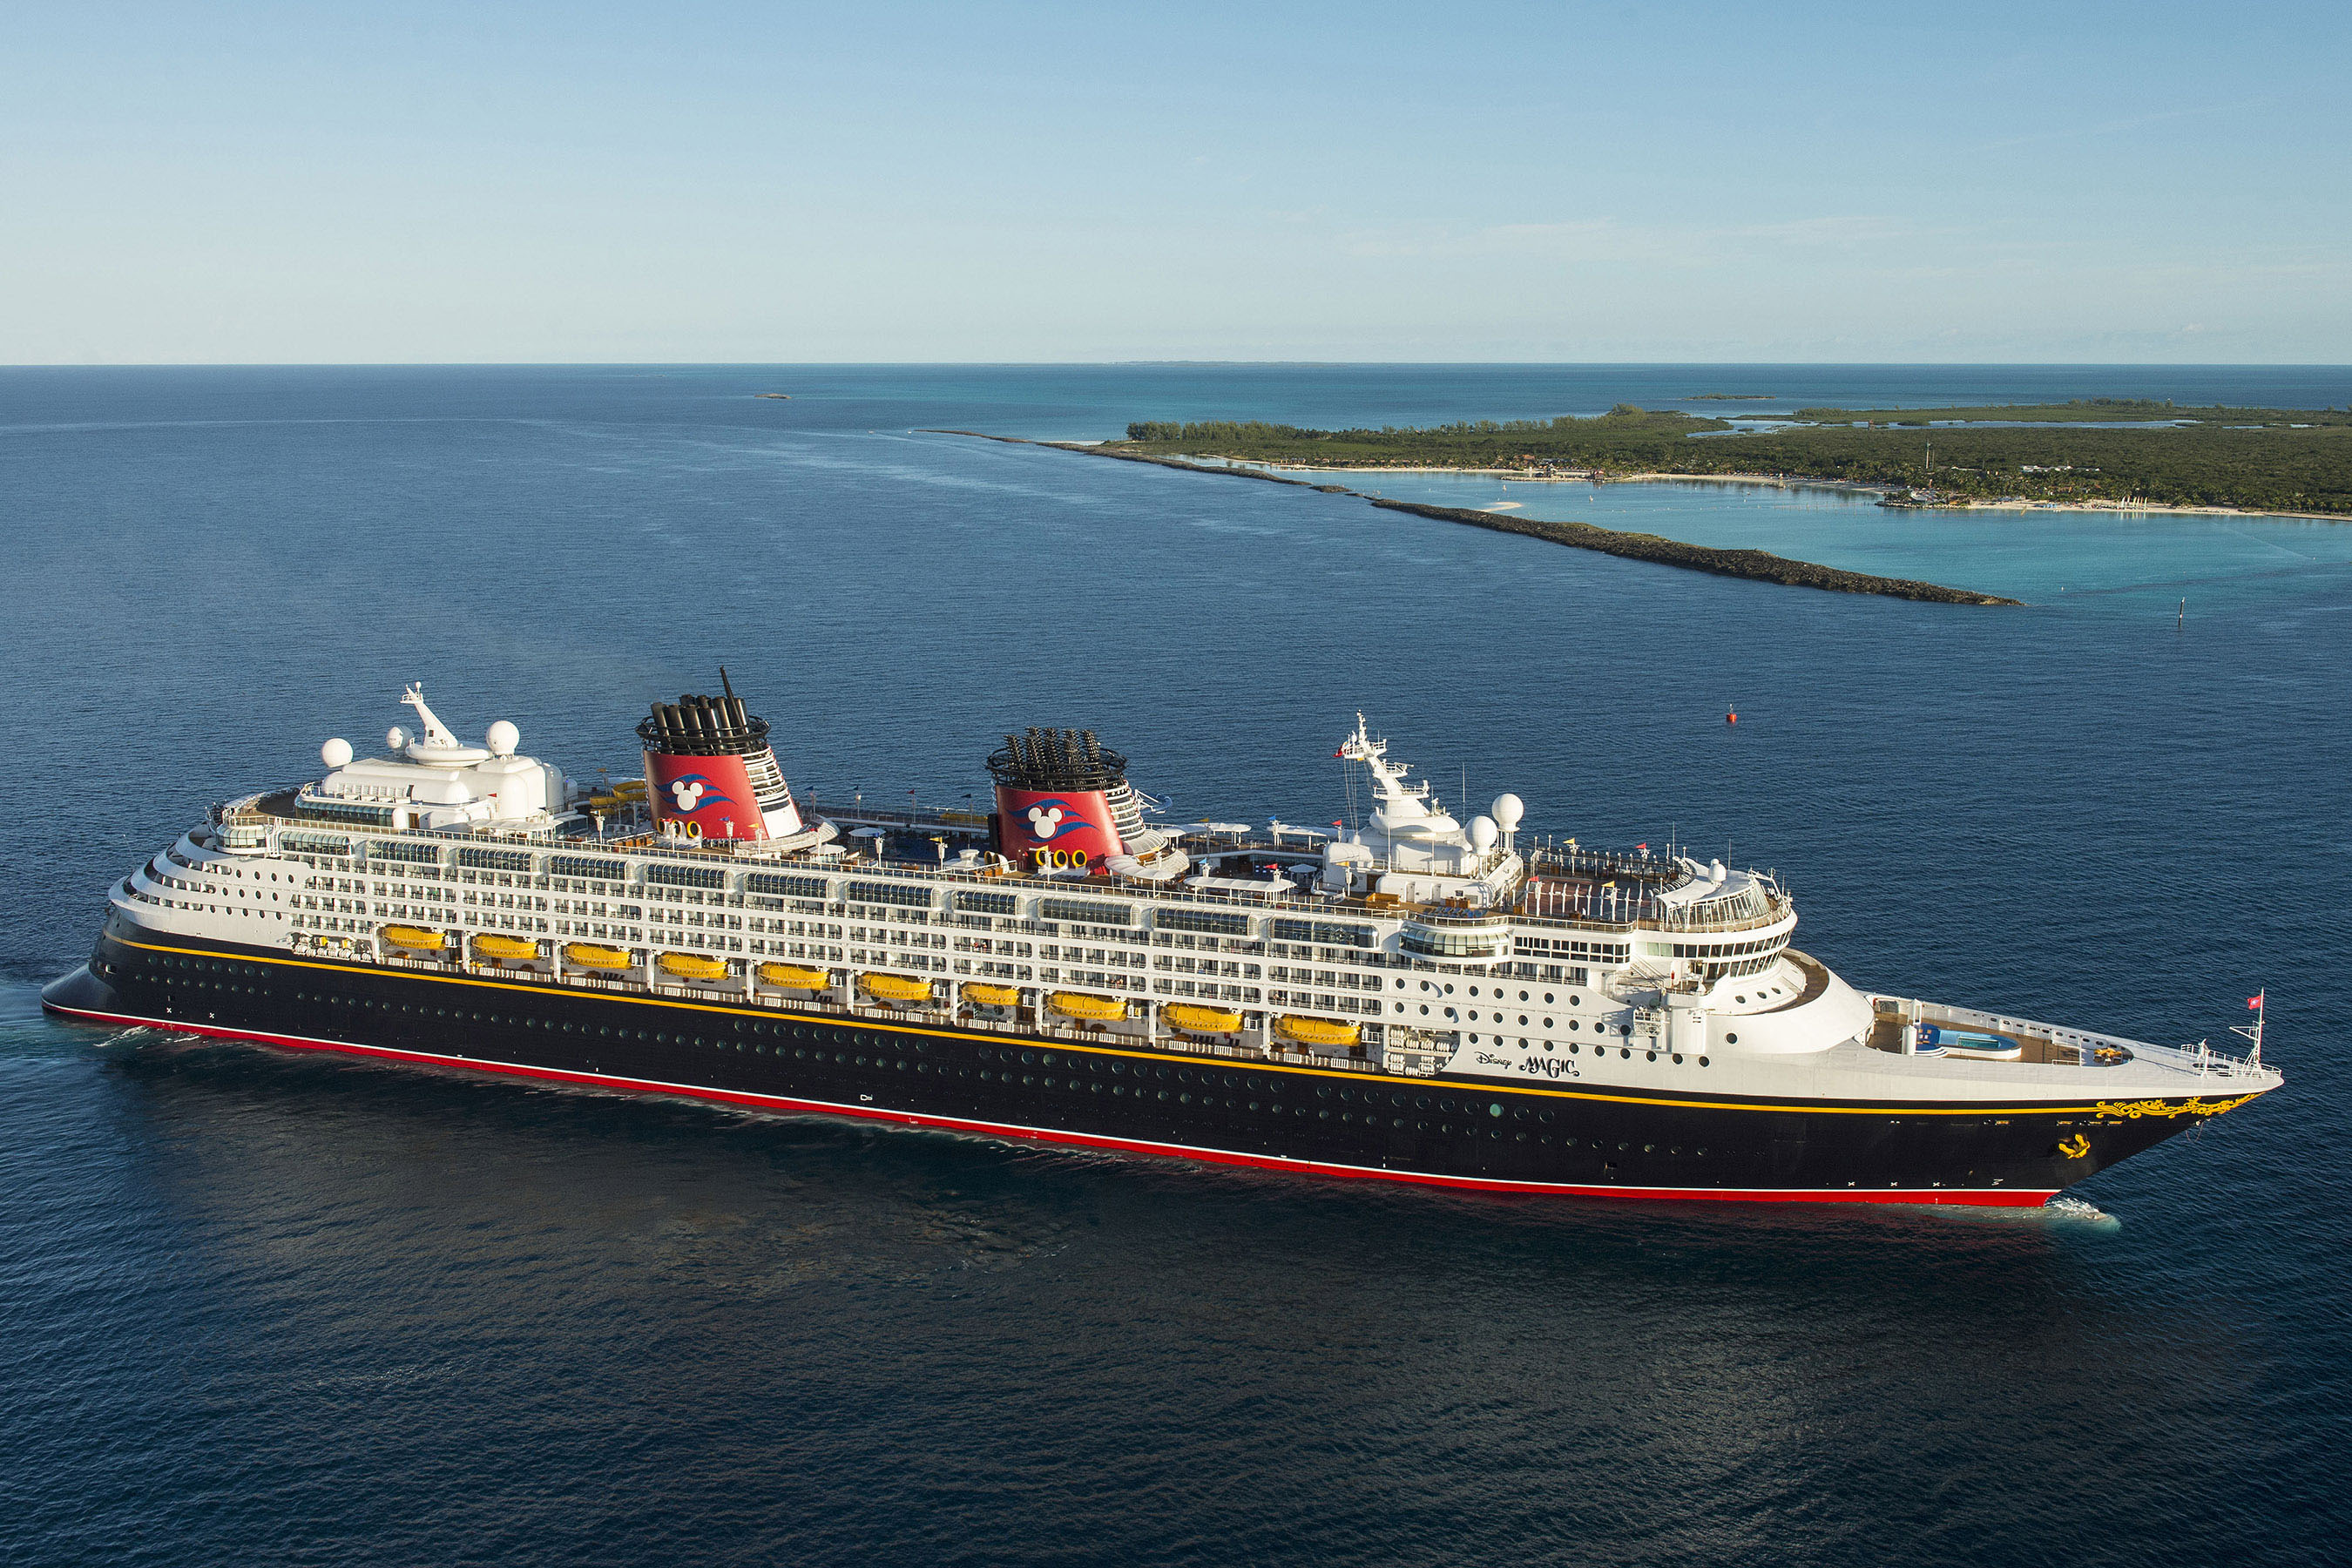 Disney Cruise Line Debuts Diverse Lineup of Itineraries and Home Ports for Fall 2019